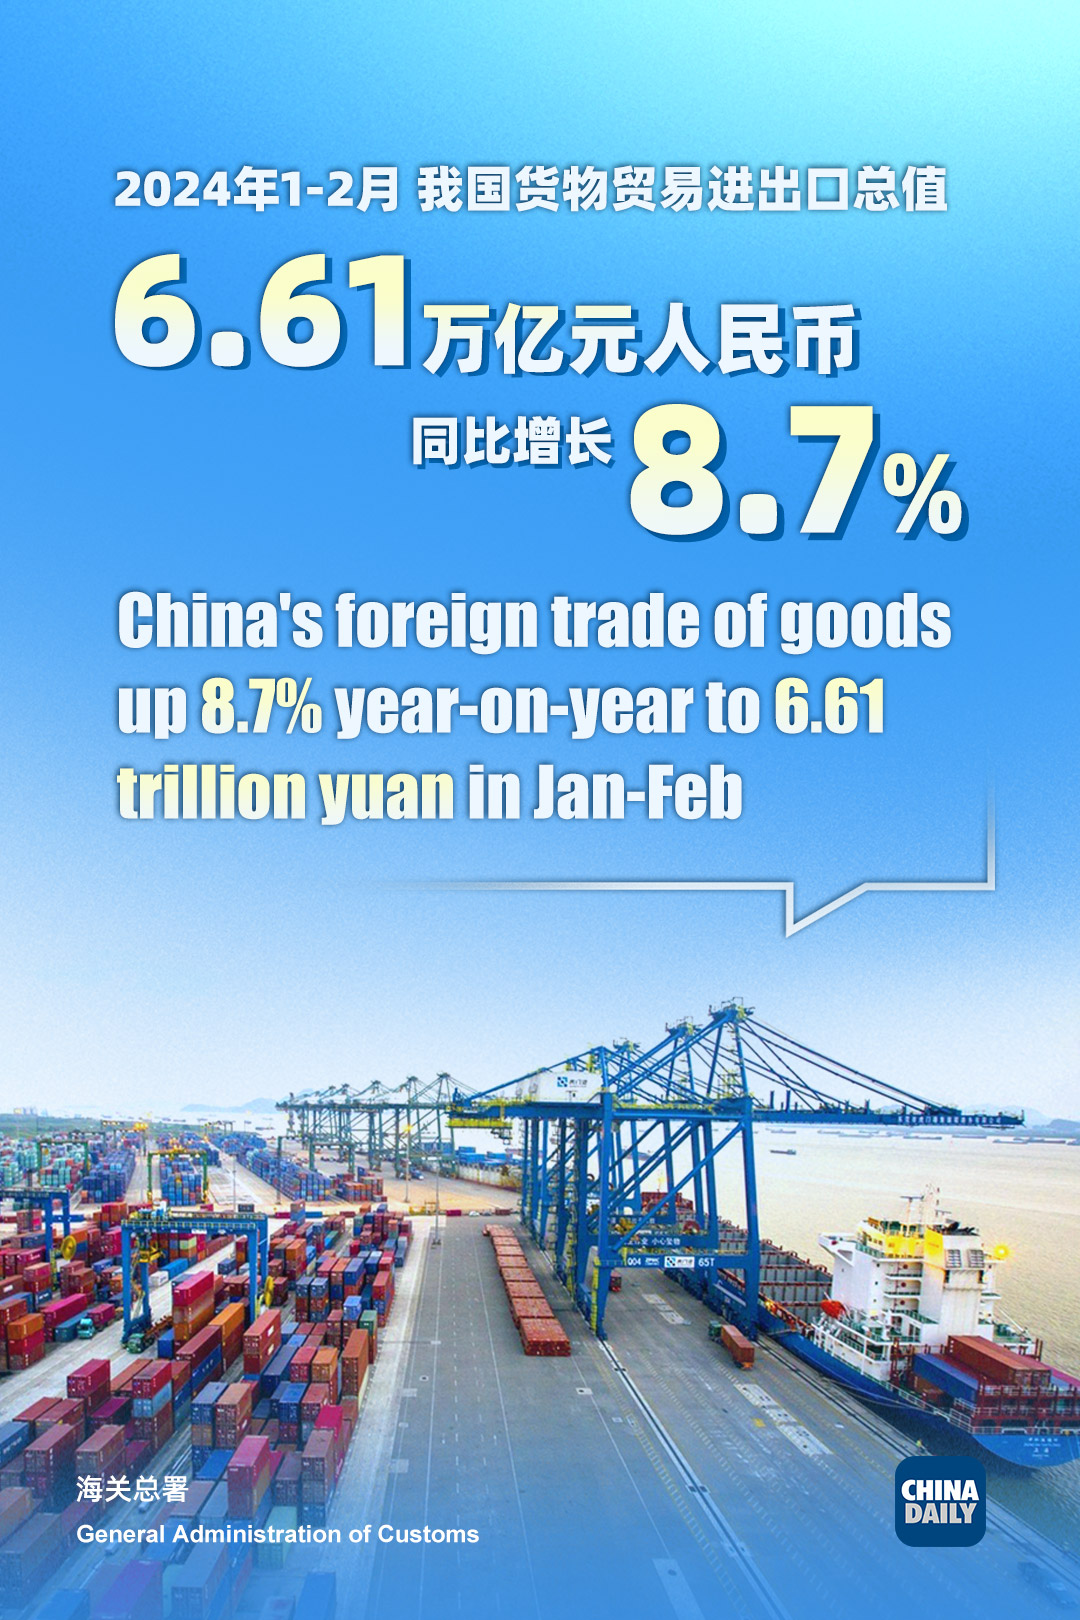 China's foreign trade up 8.7% in Jan-Feb period